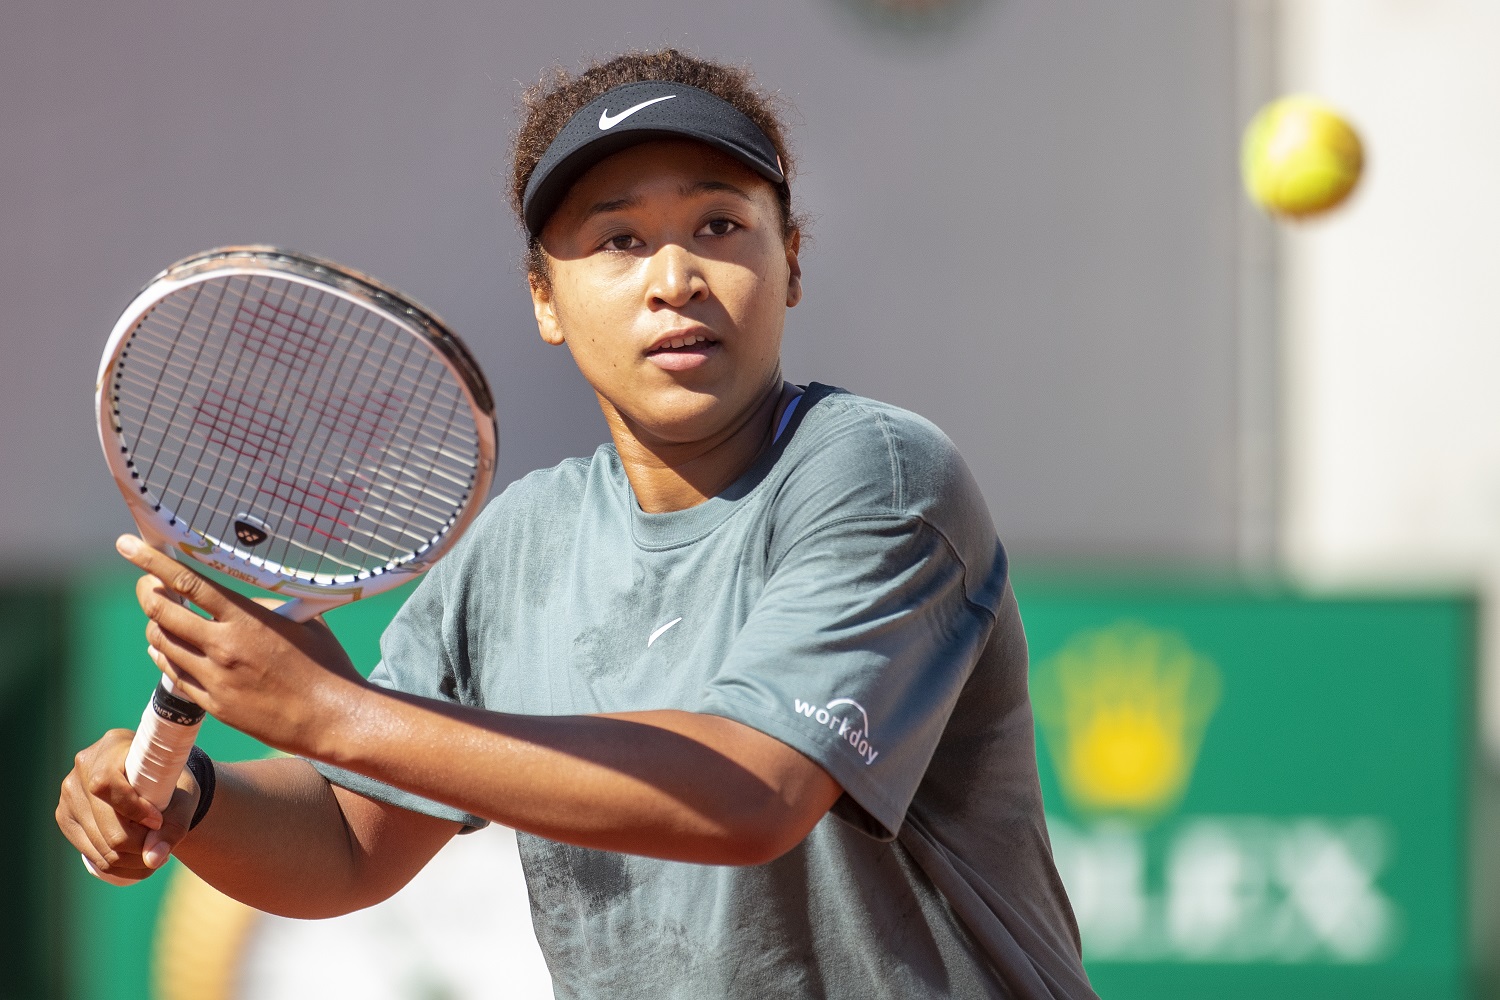 Naomi Osaka practices in preparation for the 2021 French Open at Roland Garros. | Tim Clayton/Corbis via Getty Images